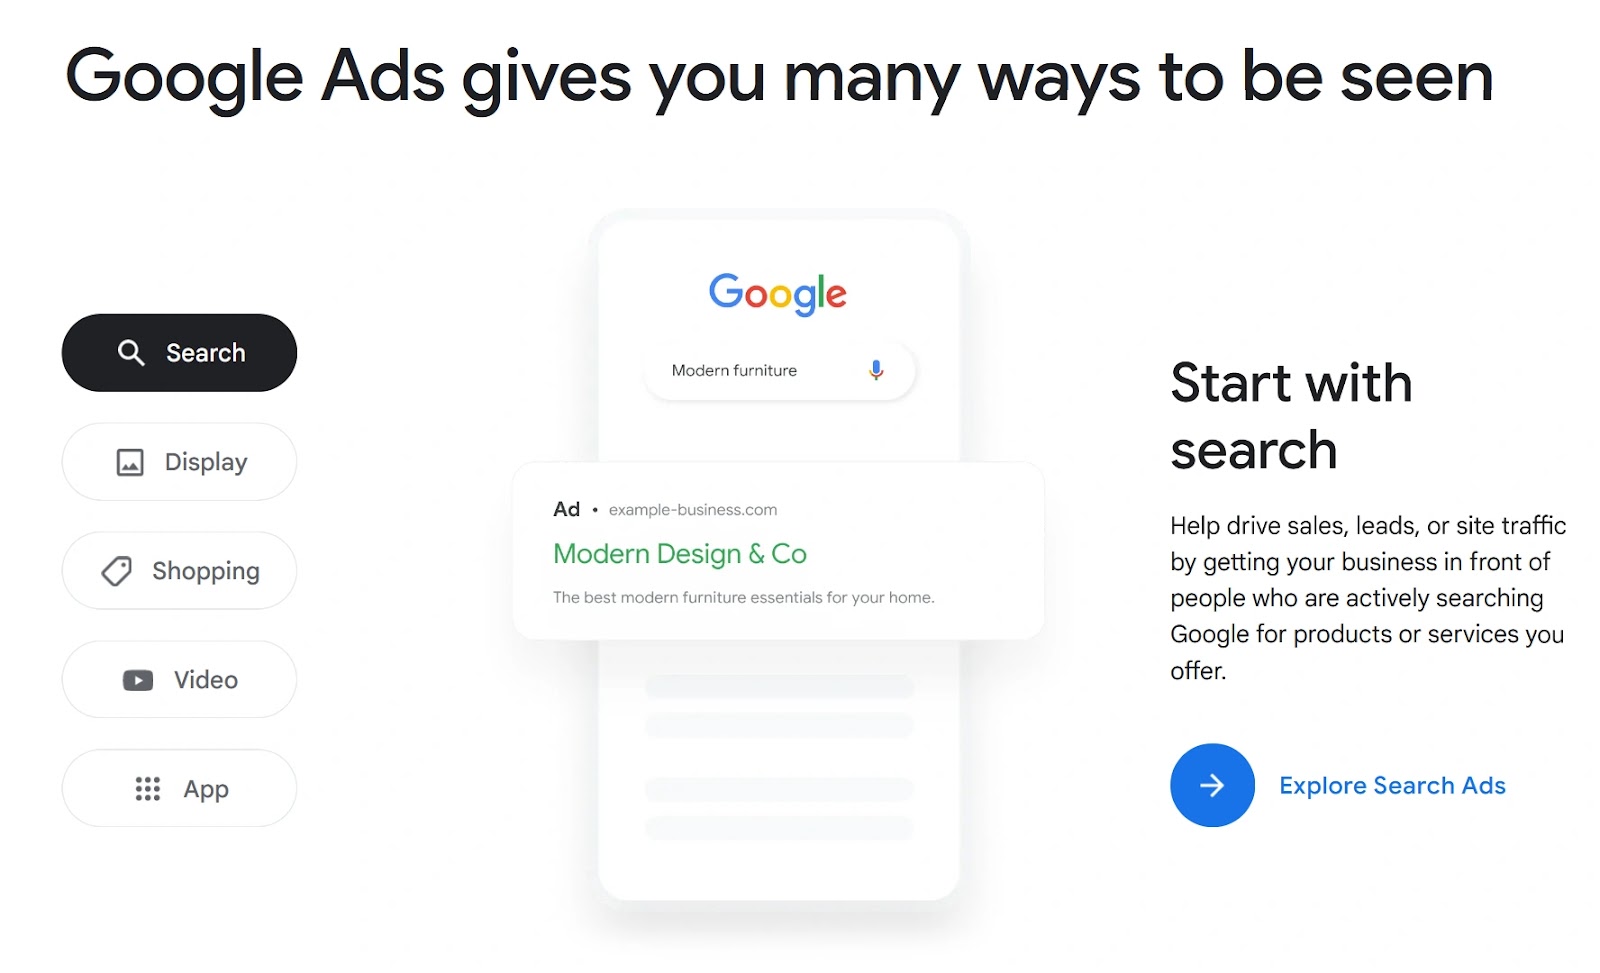 "Google Ads gives you many ways to be seen" landing page